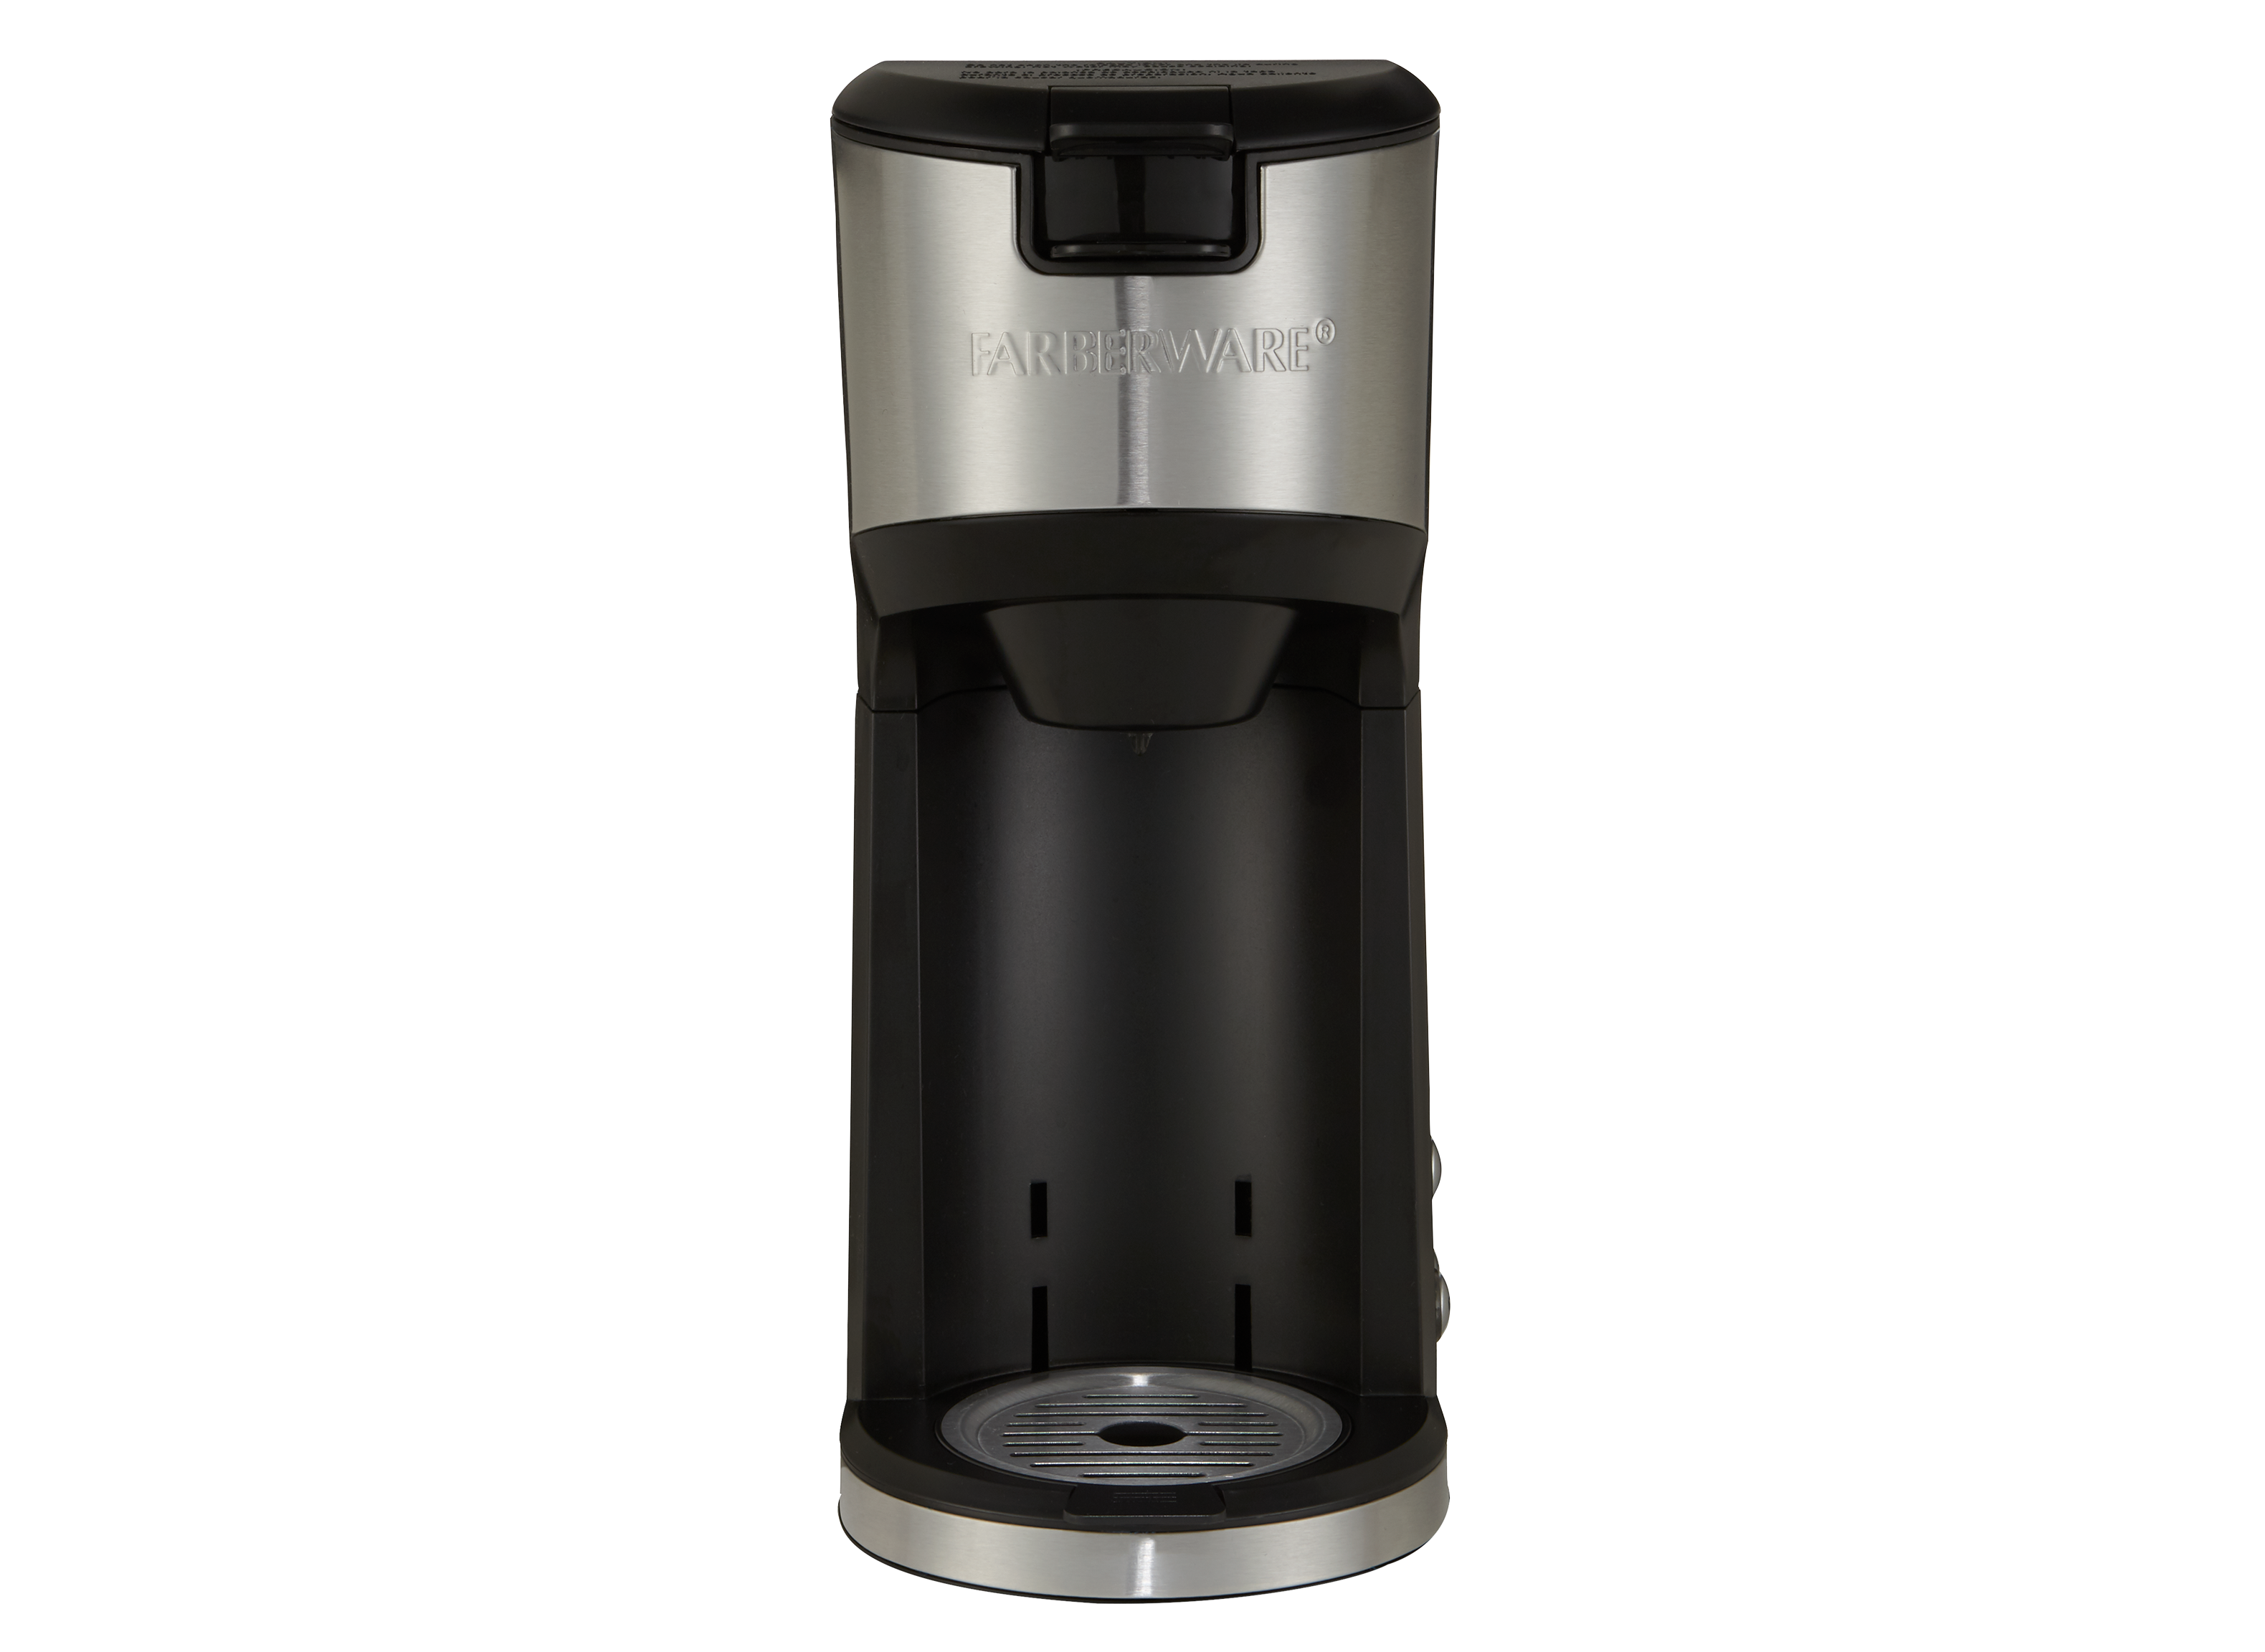 https://crdms.images.consumerreports.org/prod/products/cr/models/395540-one-or-two-mug-drip-coffee-makers-farberware-k-cup-and-brew-stainless-and-black-201615-10000120.png